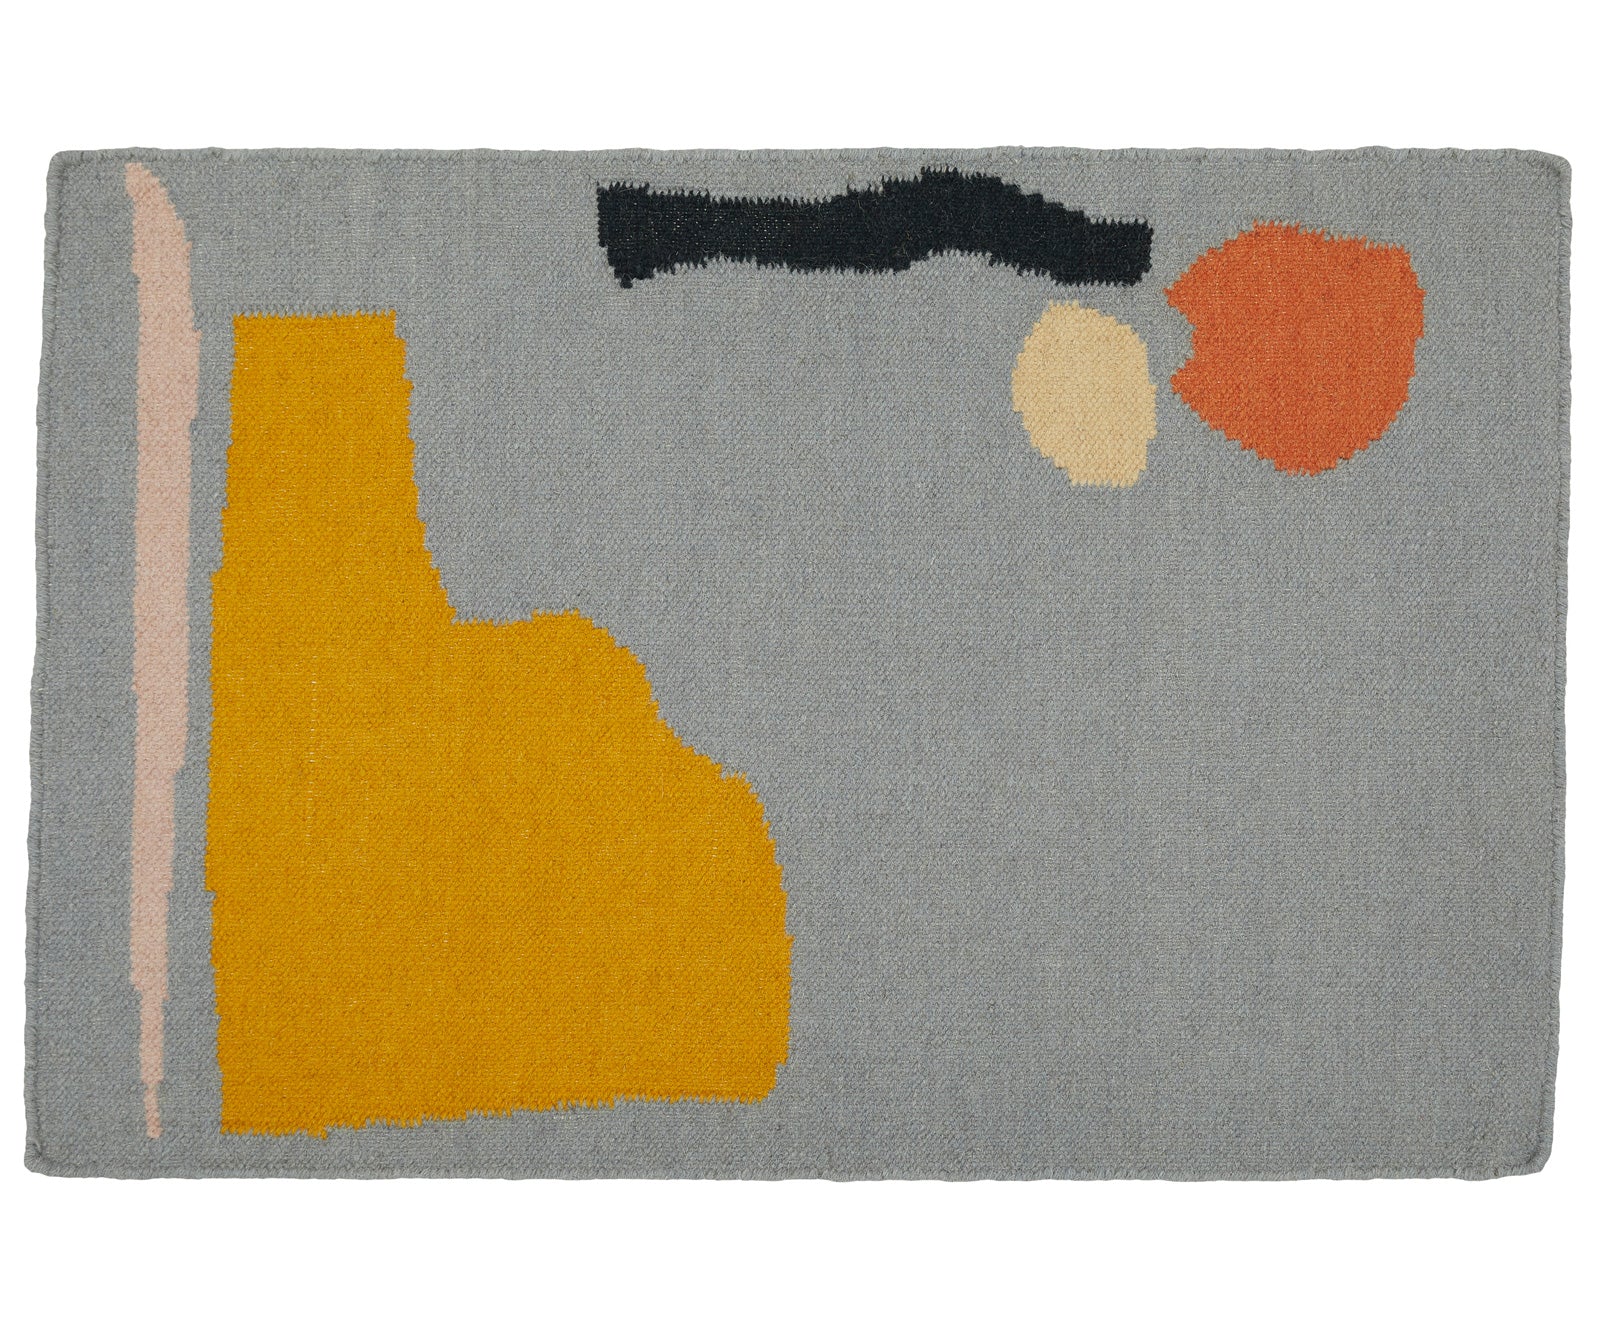 A 100% wool yarn flat weave rug from Cold Picnic. An abstract design featuring blue/grey with yellow and black